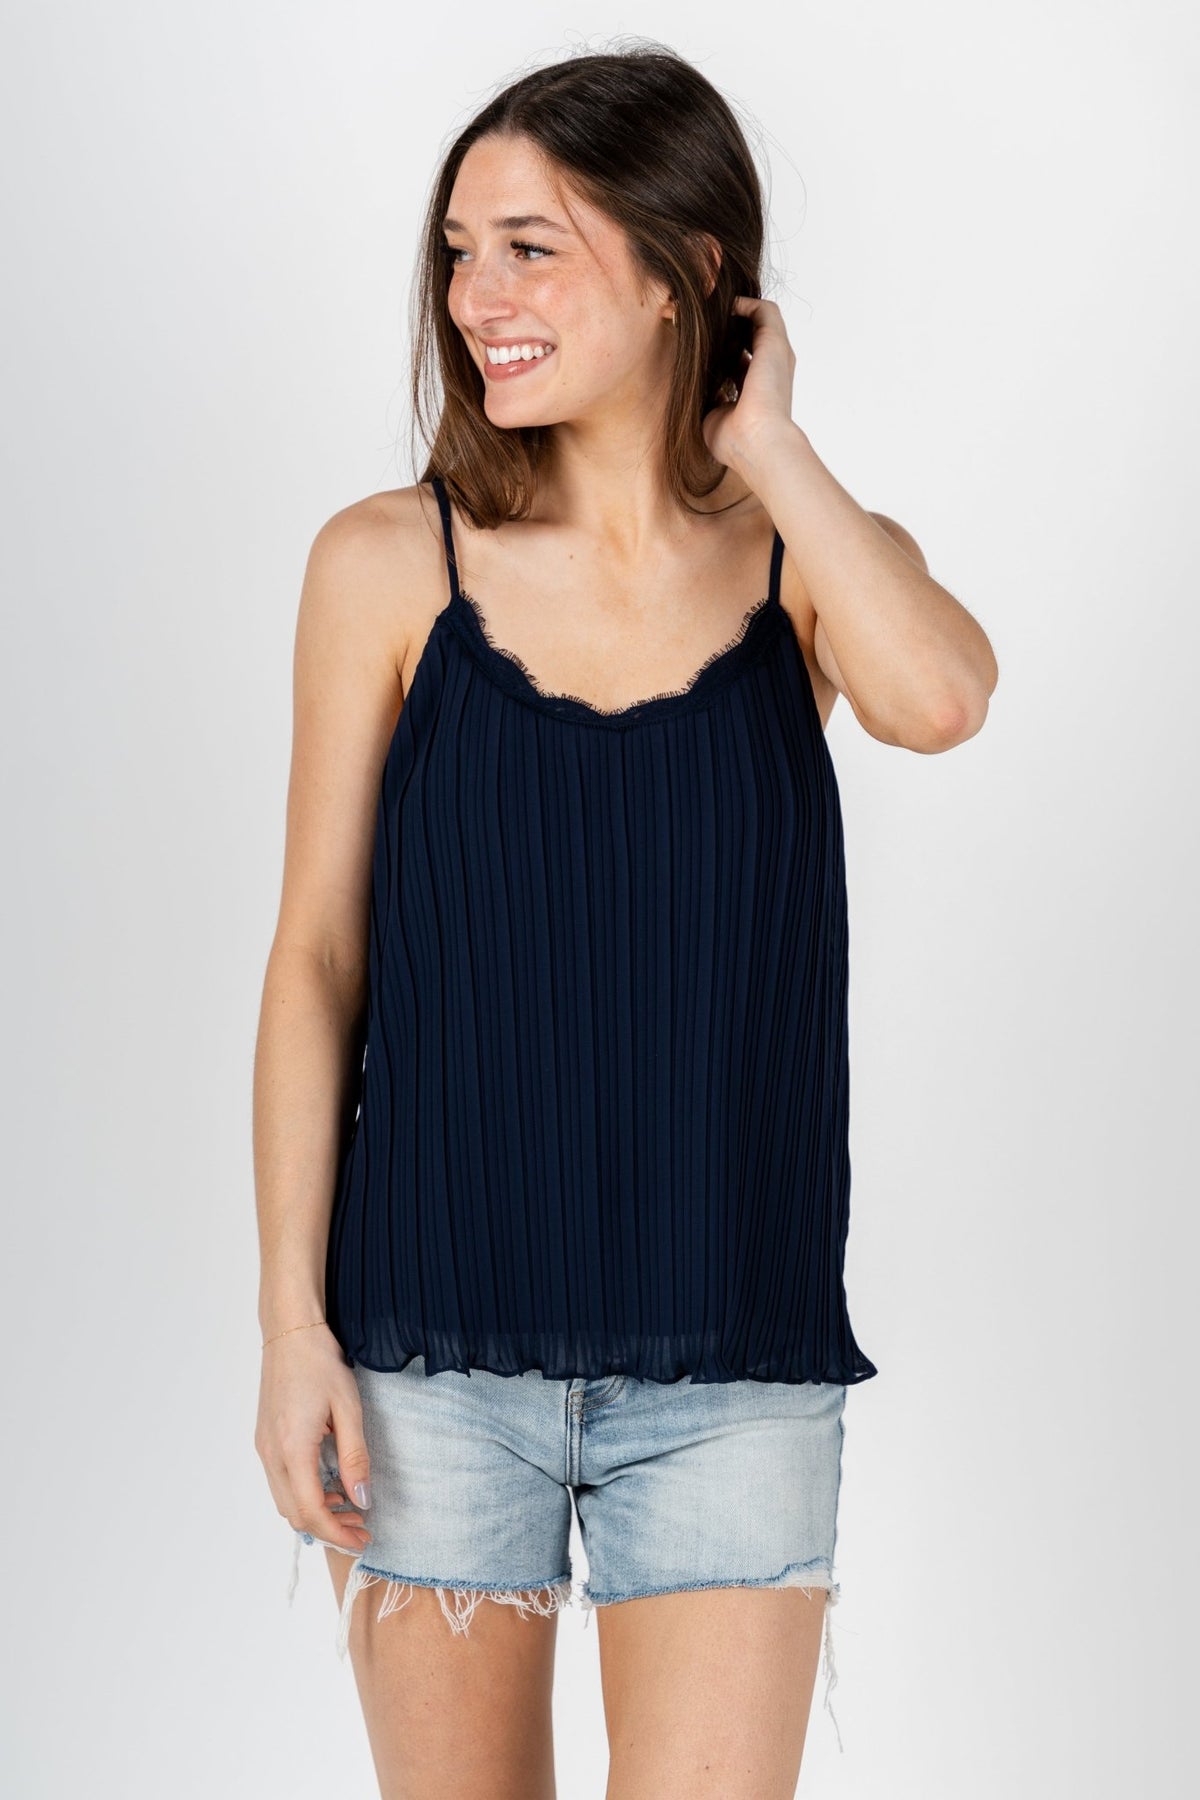 Pleated lace cami tank top navy - Trendy sweater - Cute American Summer Collection at Lush Fashion Lounge Boutique in Oklahoma City